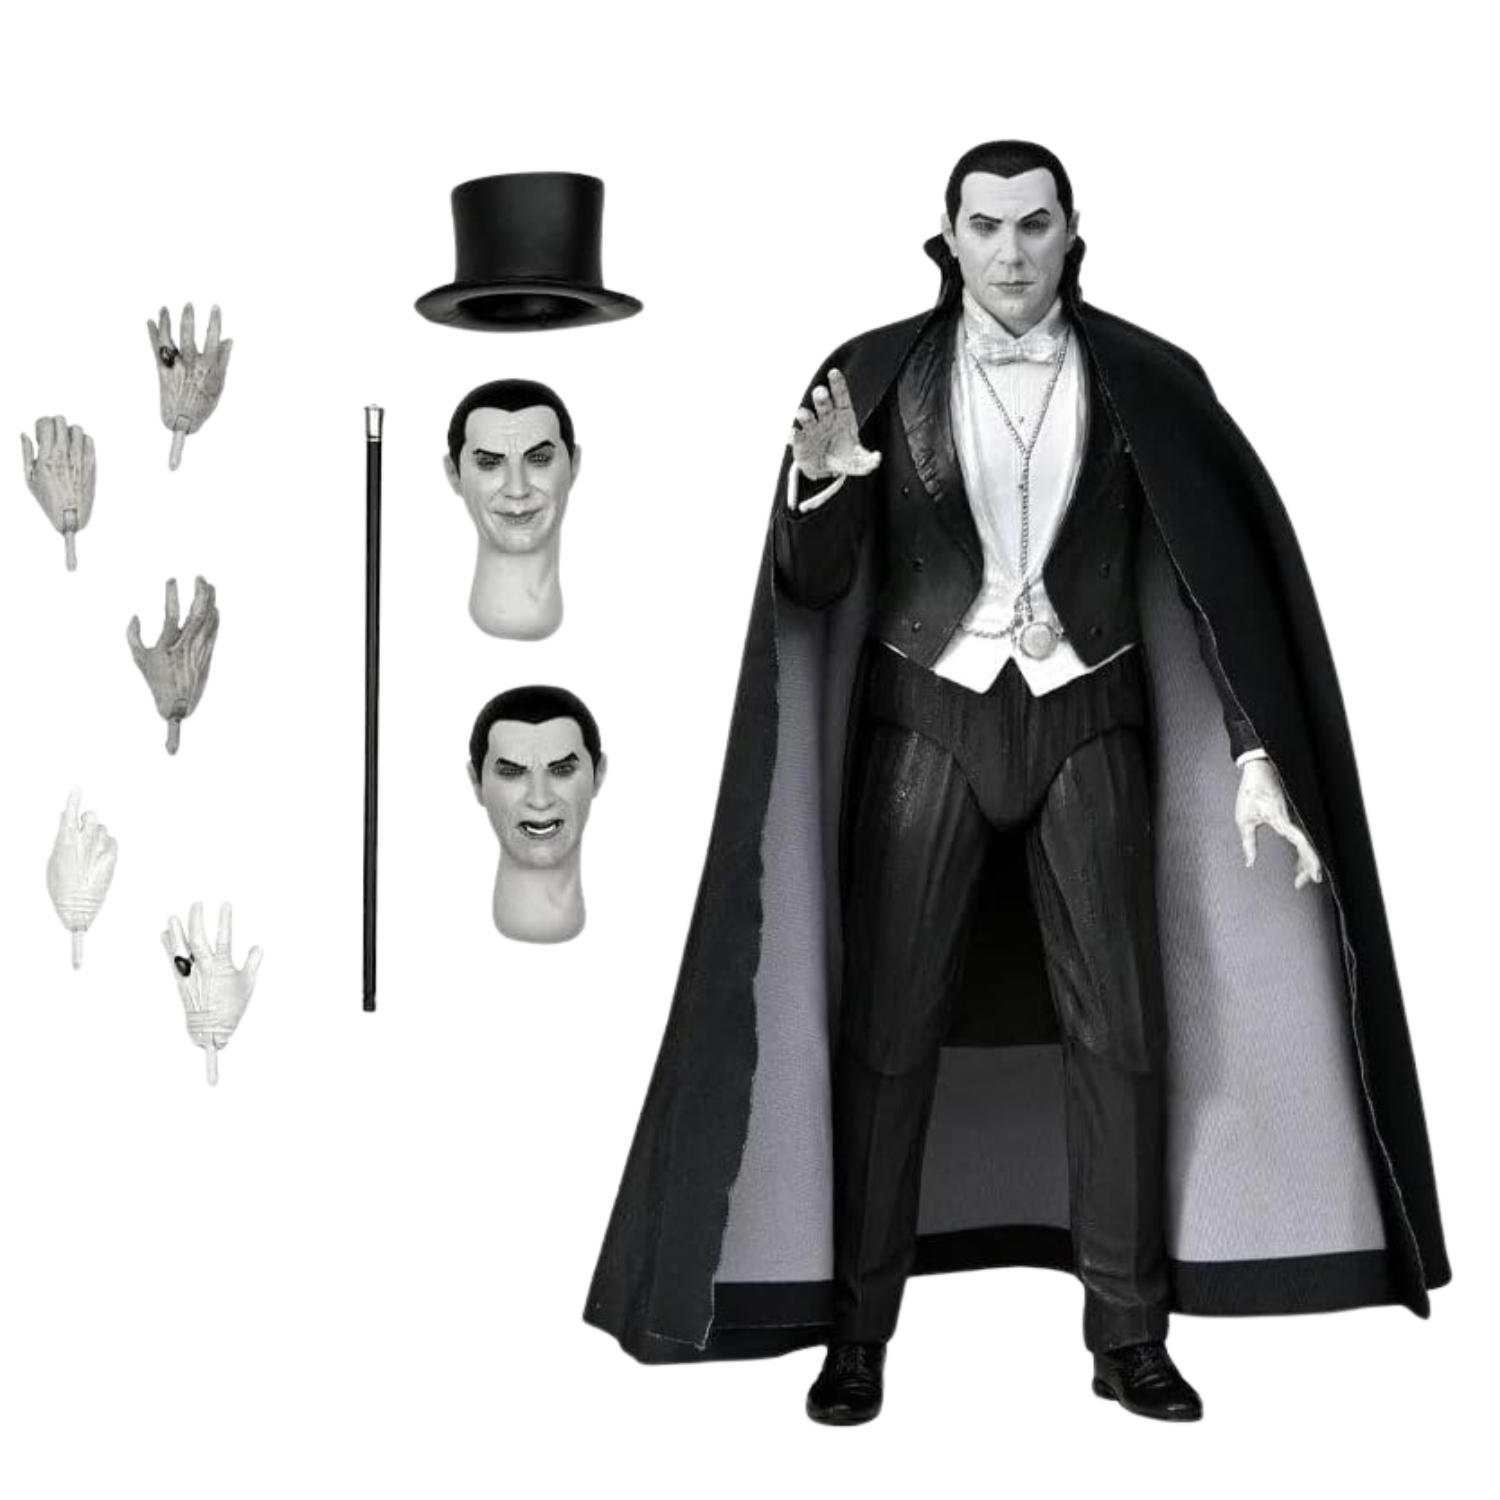 This image shows a Dracula figurine with all the accessories. 